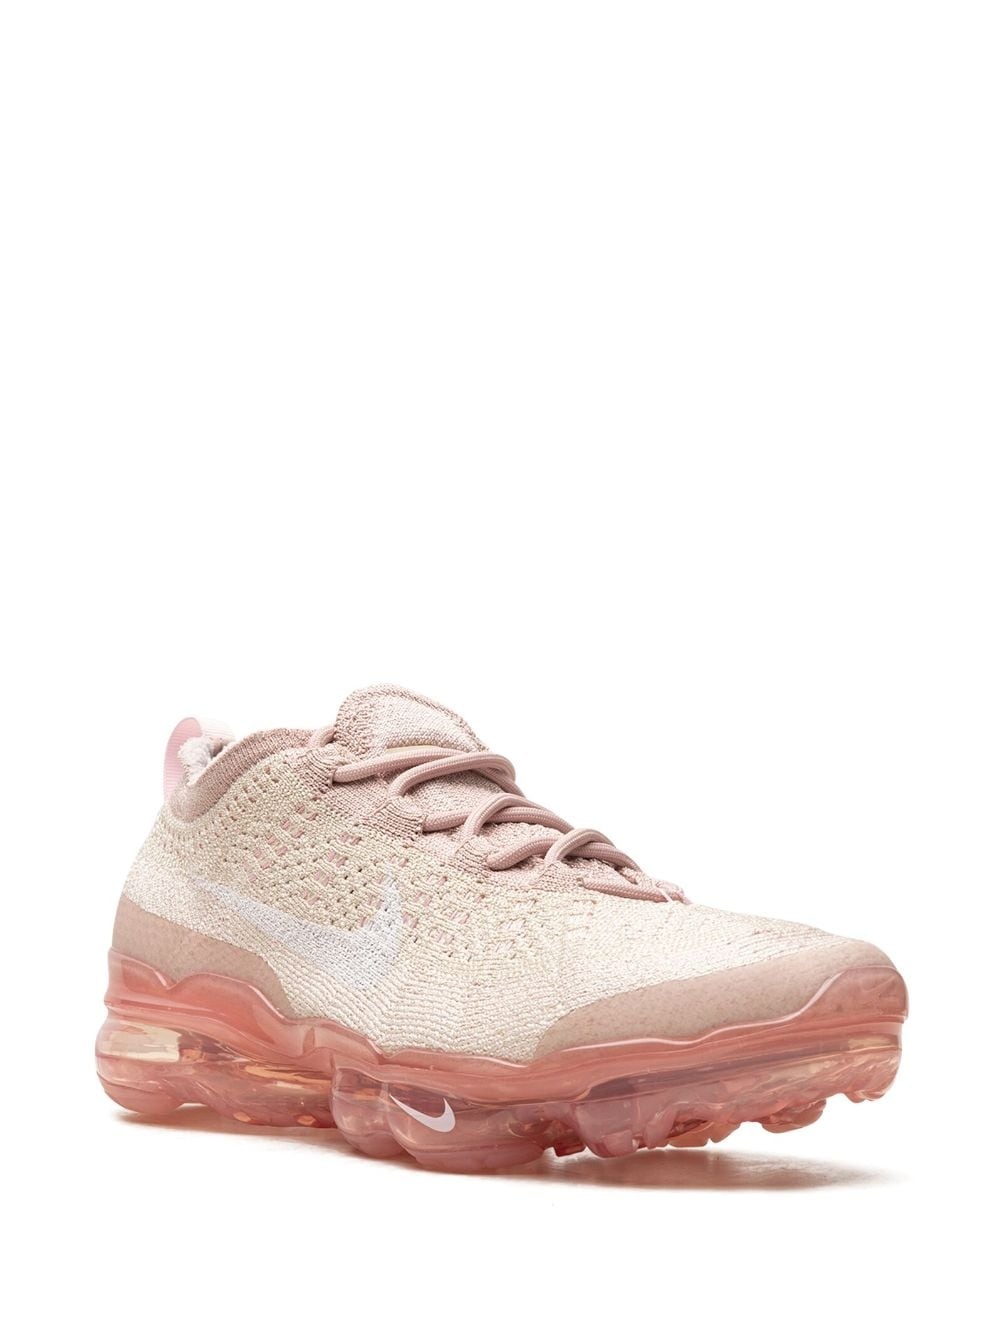 Air VaporMax 2023 Flyknit "Oatmeal Pearl Pink" sneakers - 2